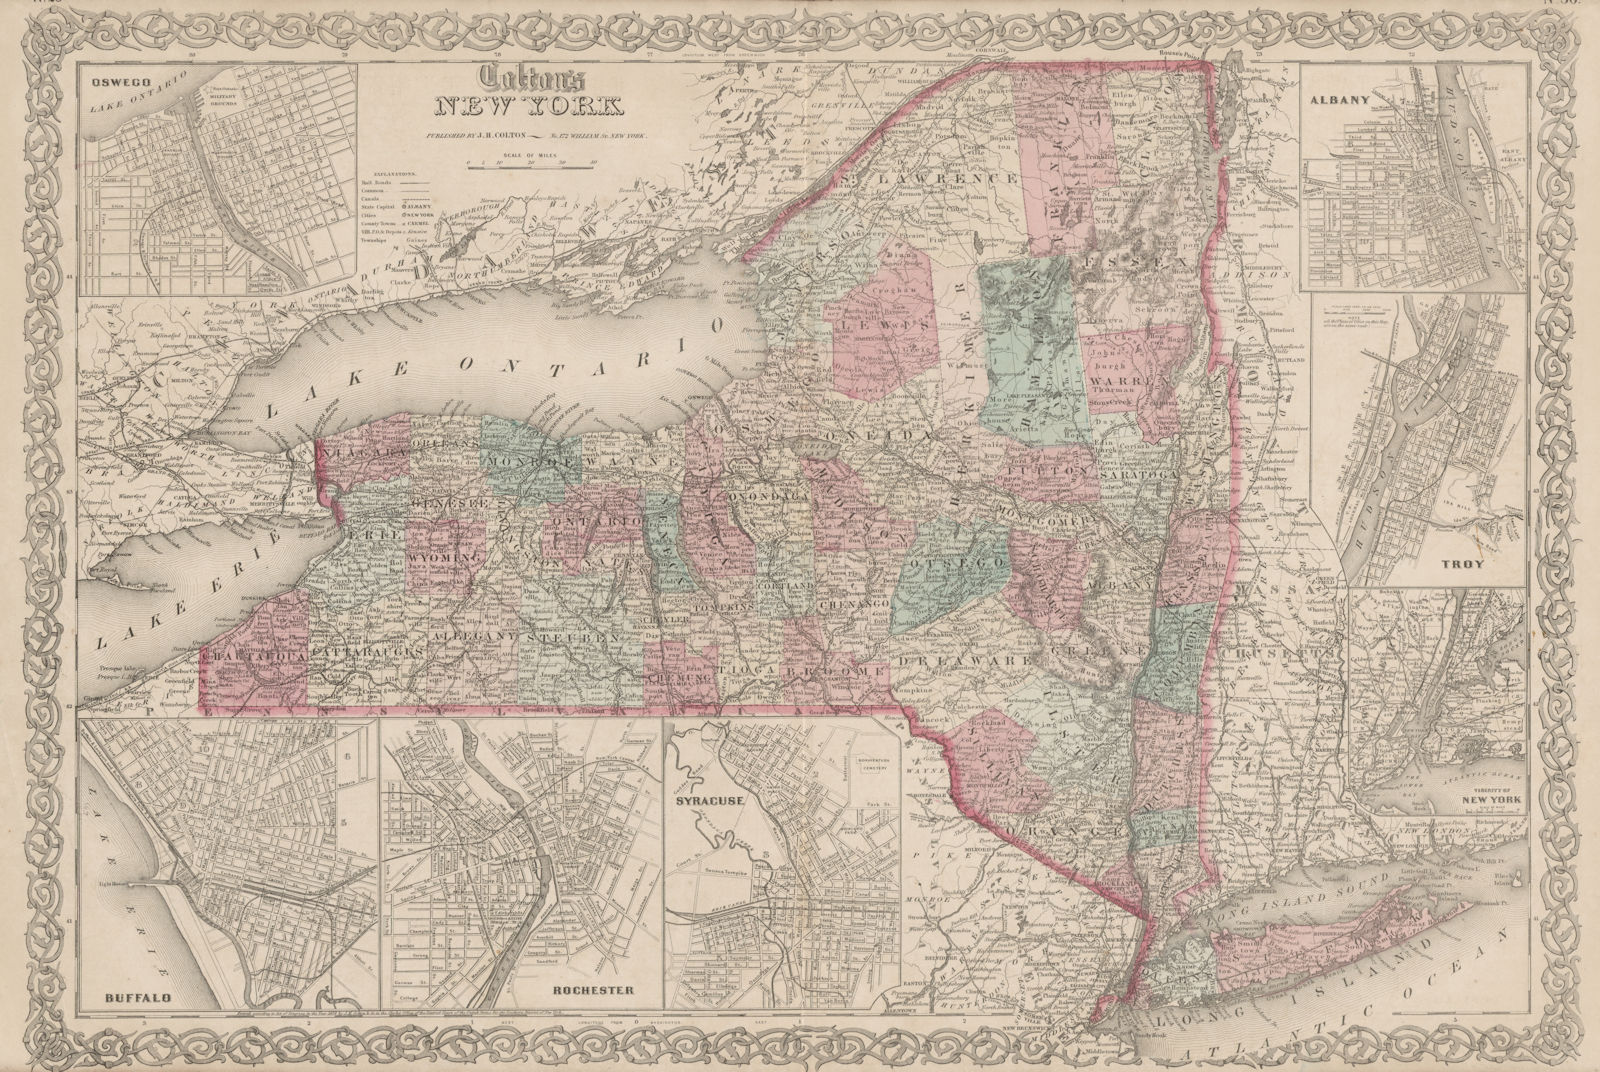 Associate Product "Colton's New York" state Oswego Buffalo Rochester Syracuse Troy Albany 1863 map